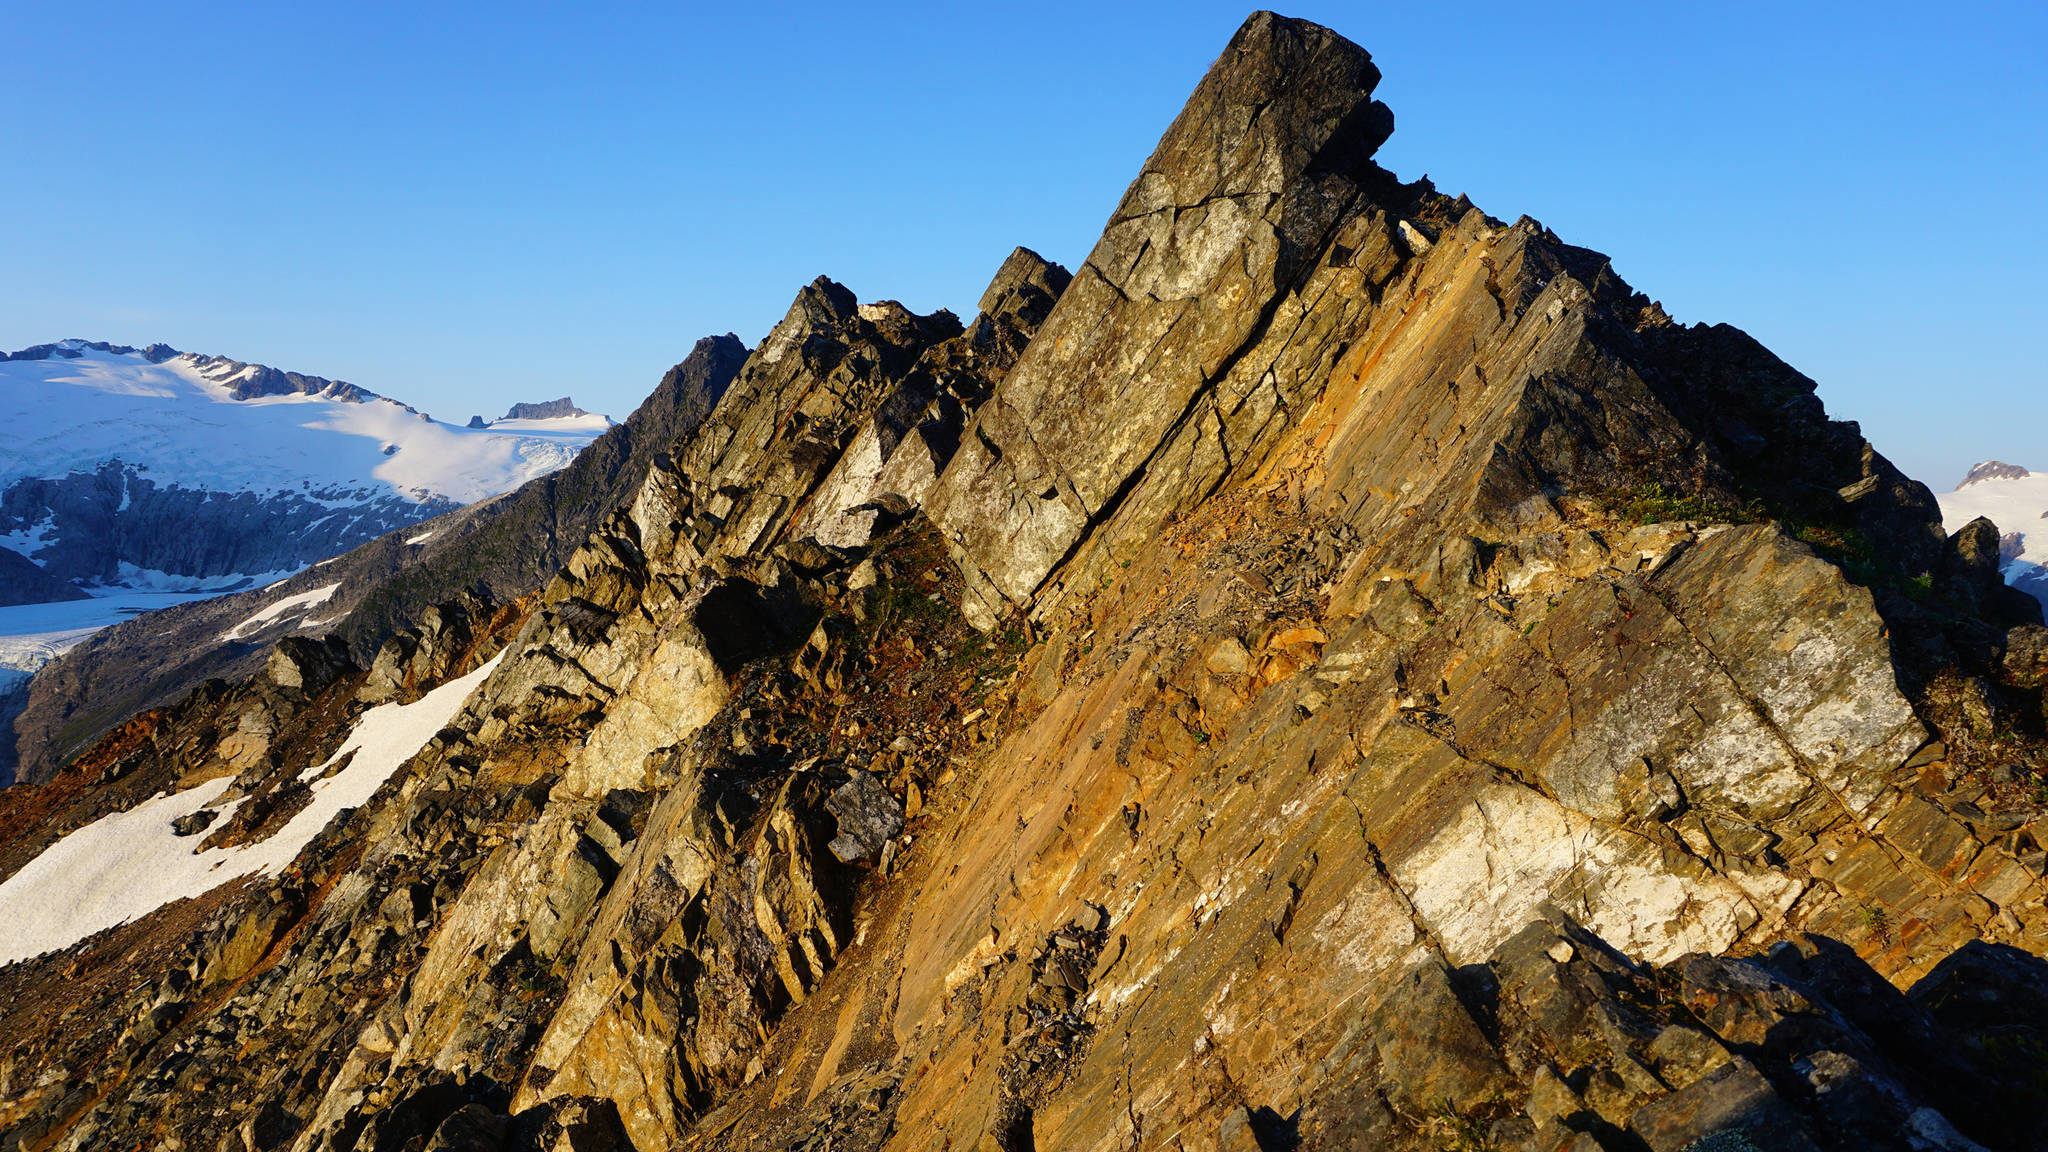 Sights along the hike from West Glacier Trail to Mount Bullard to East Glacier Trail. (Courtesy Photo | Parker Anders)